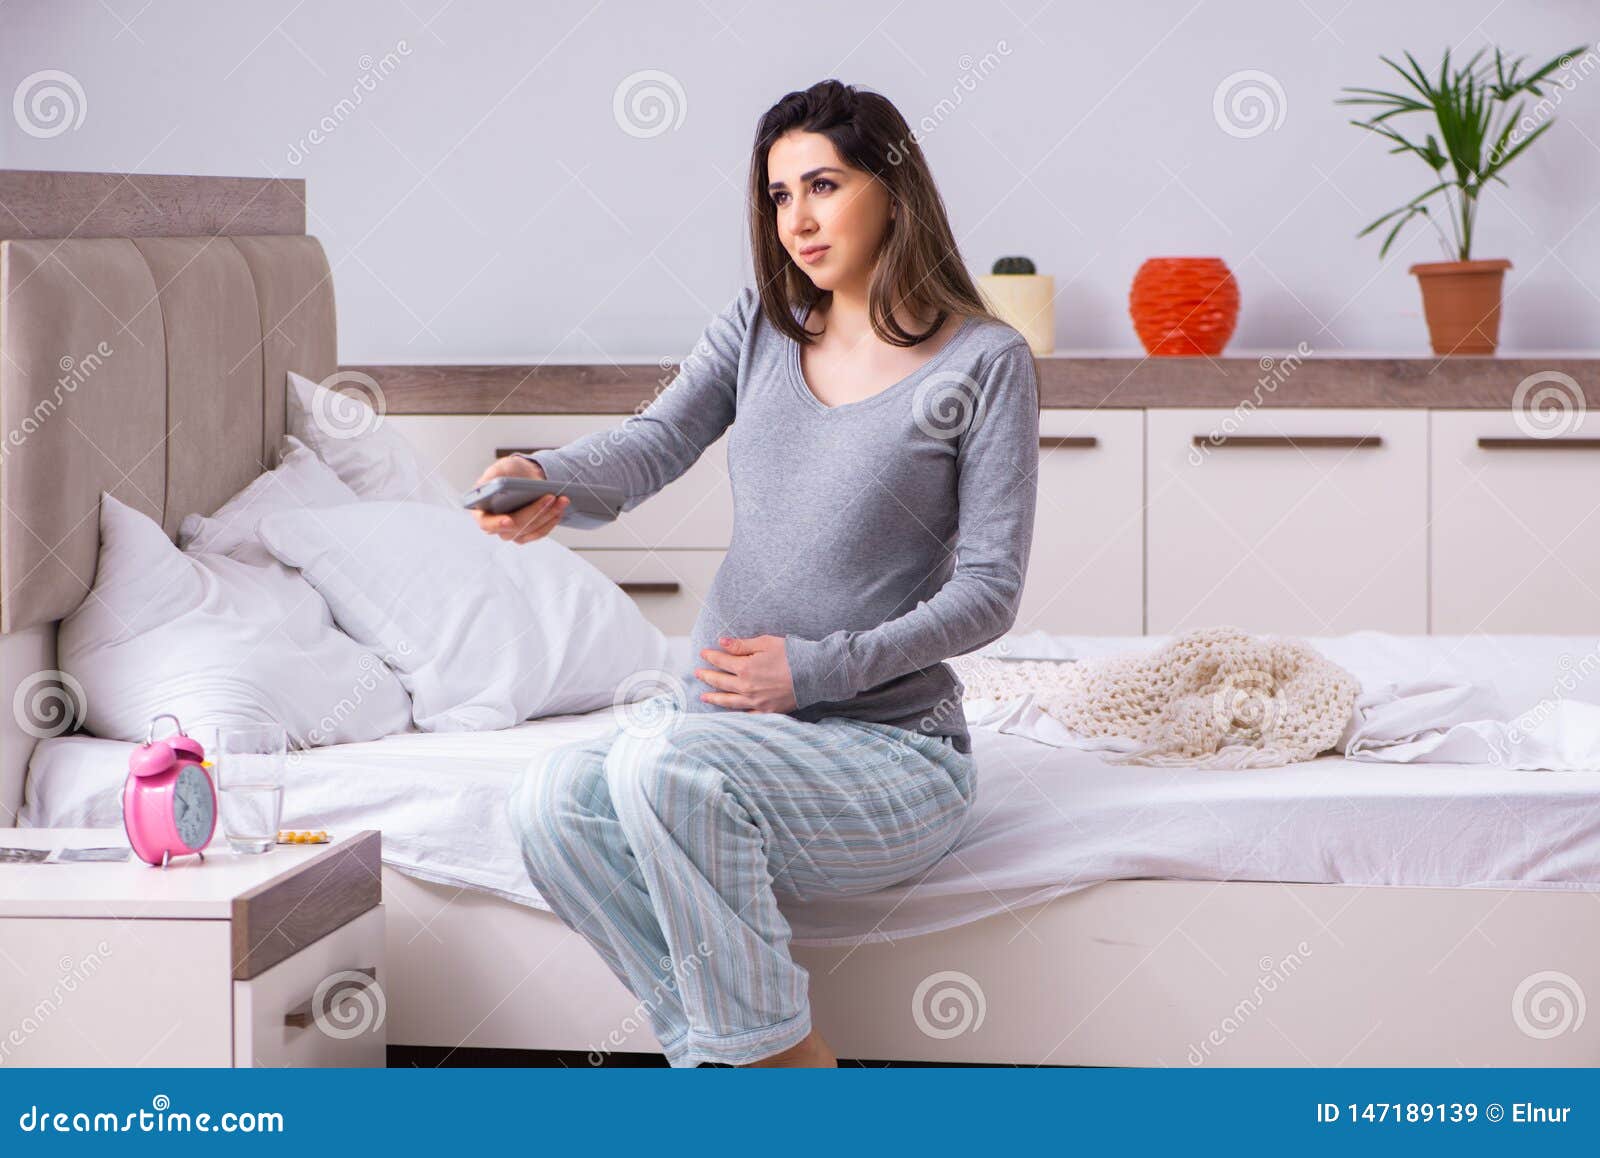 The Young Pregnant Woman In The Bedroom Stock Image Image Of Control Expecting 147189139